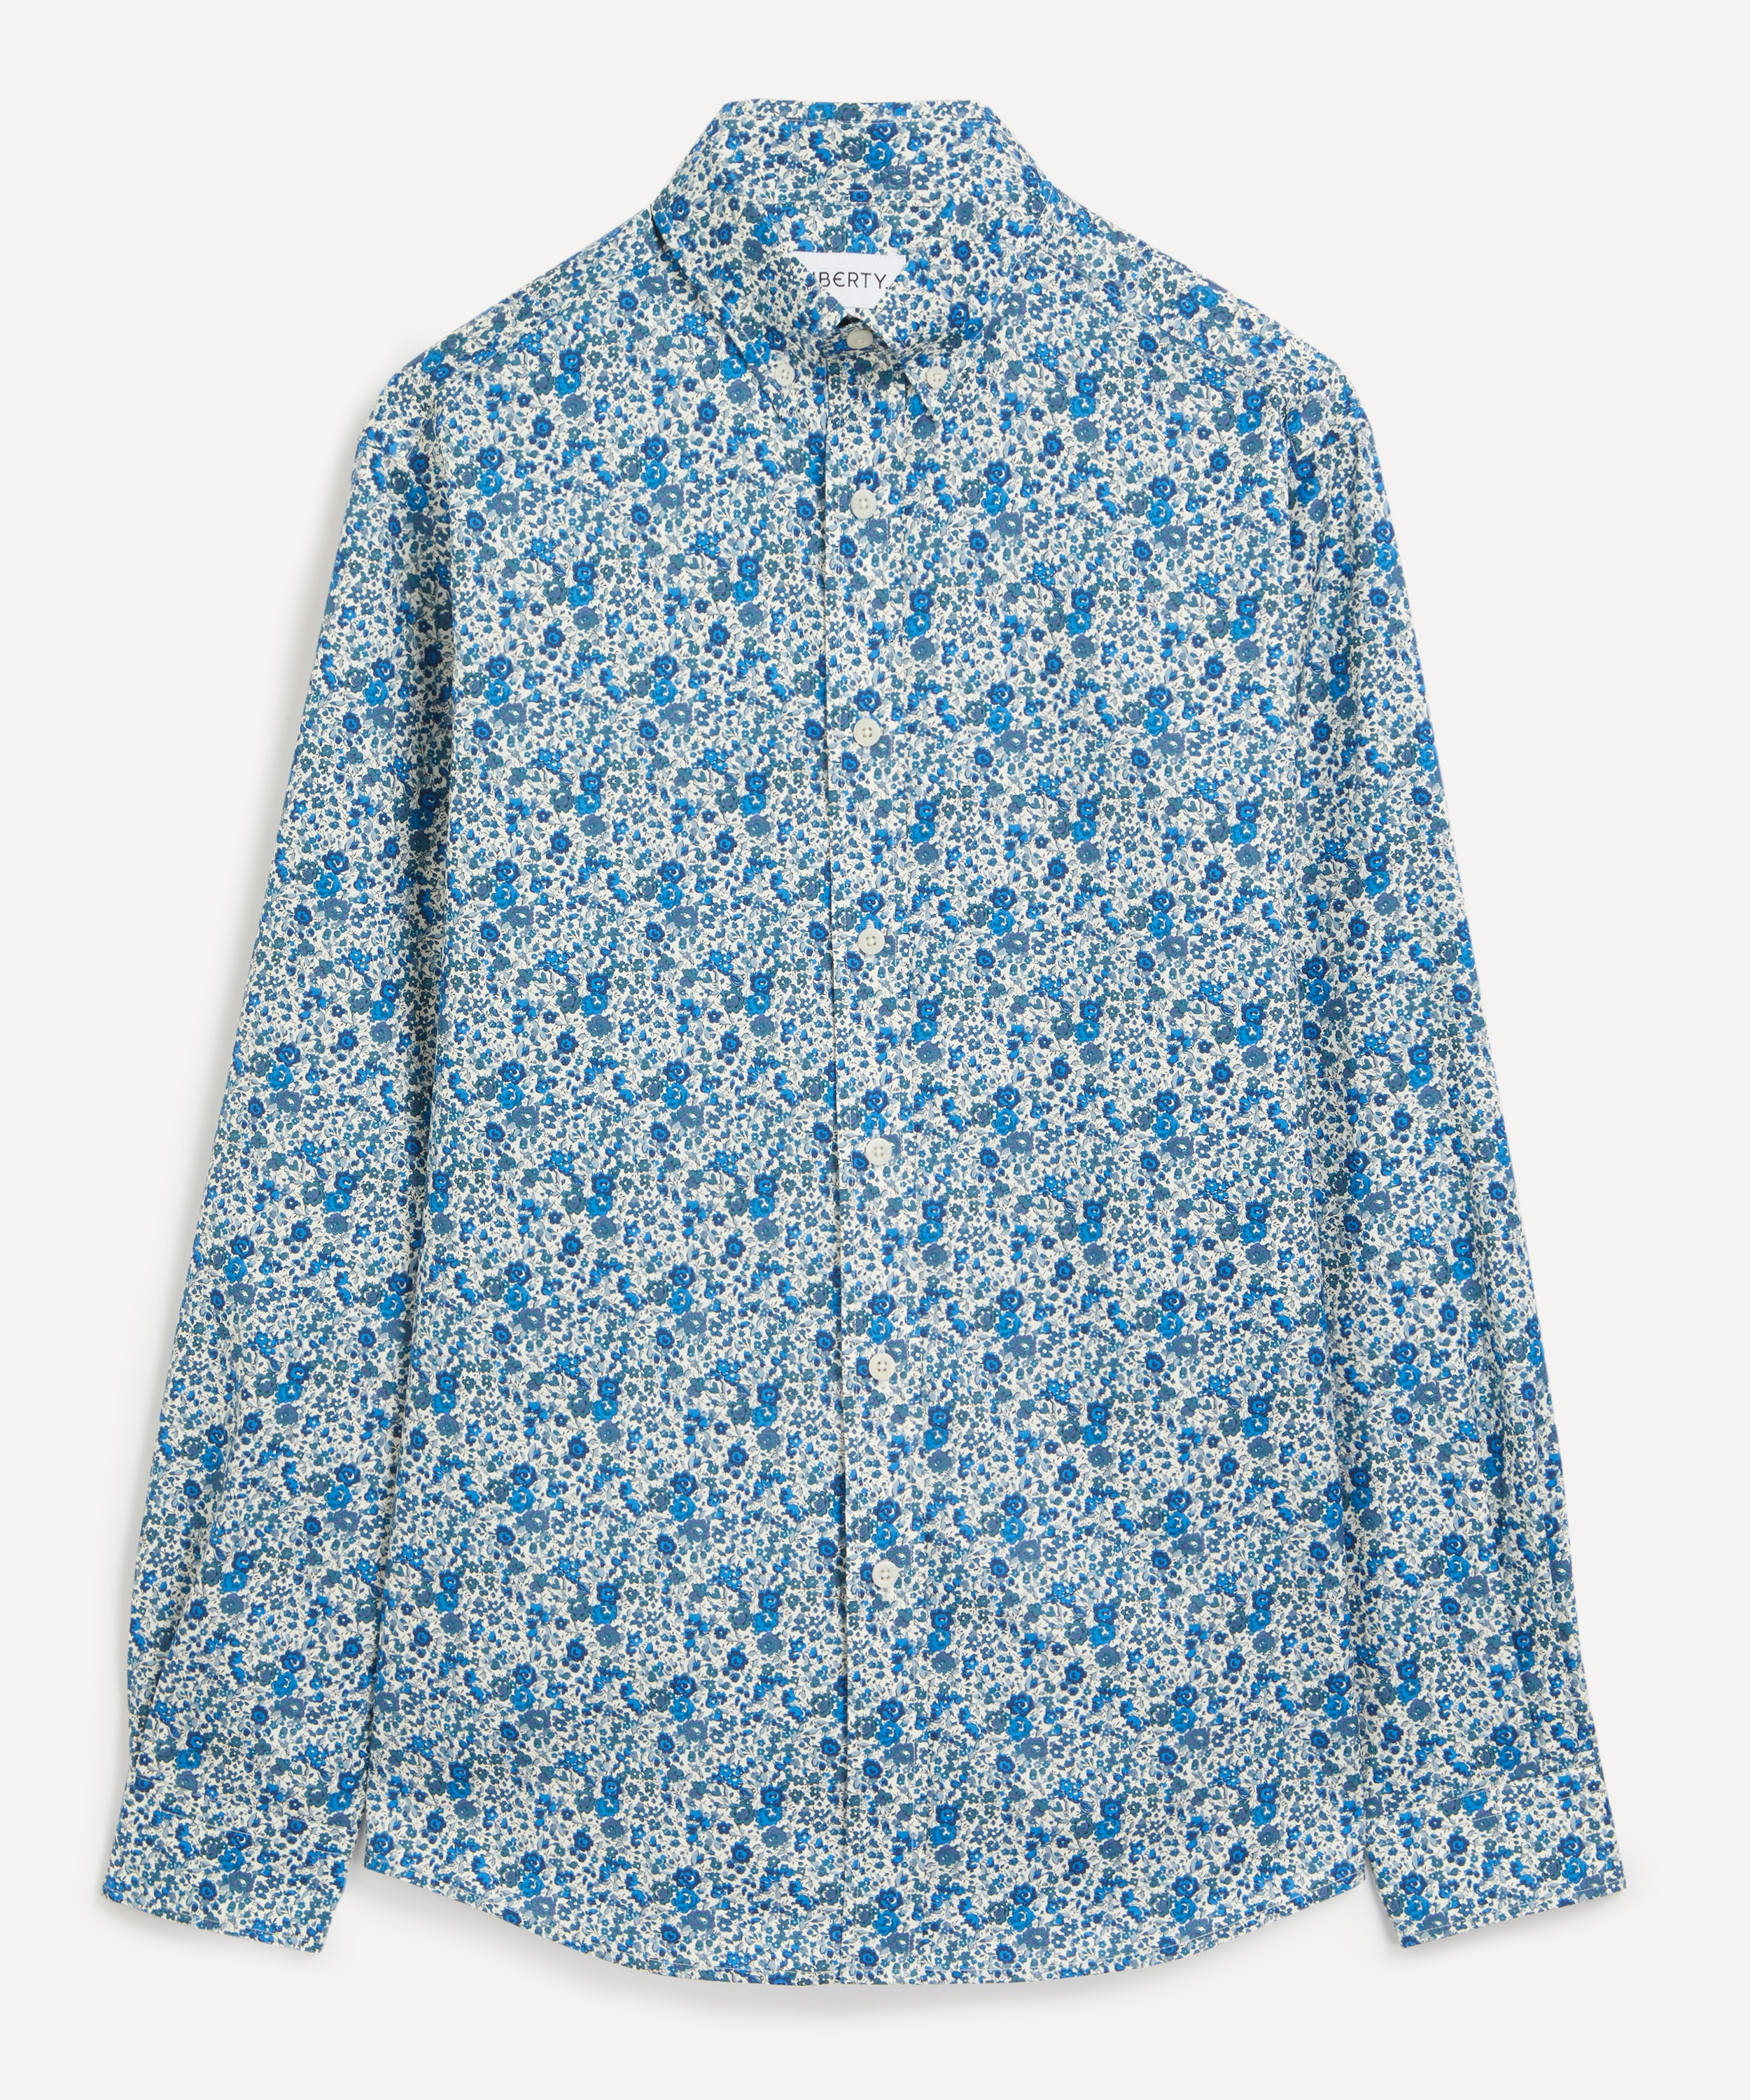 Liberty - Alex Stowe Cotton Twill Shirt in Emma and Georgina image number 0